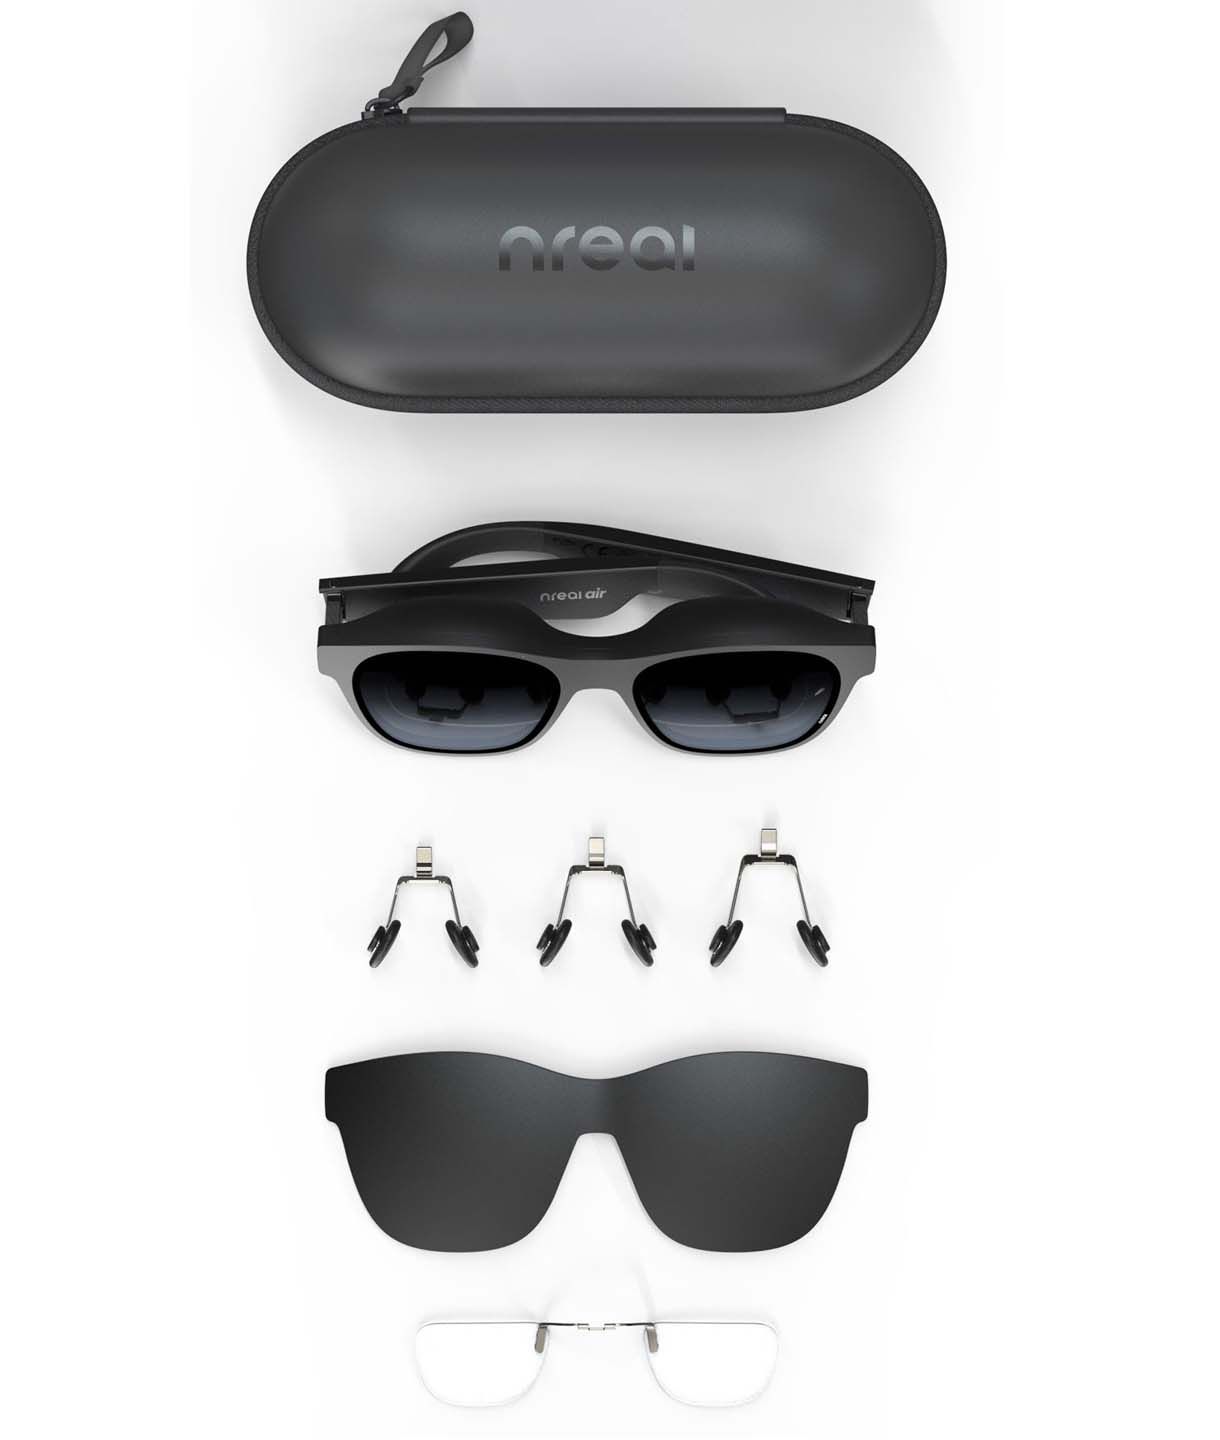 XREAL Nreal Air 2 Pro Smart AR Glasses HD Private Giant Mobile